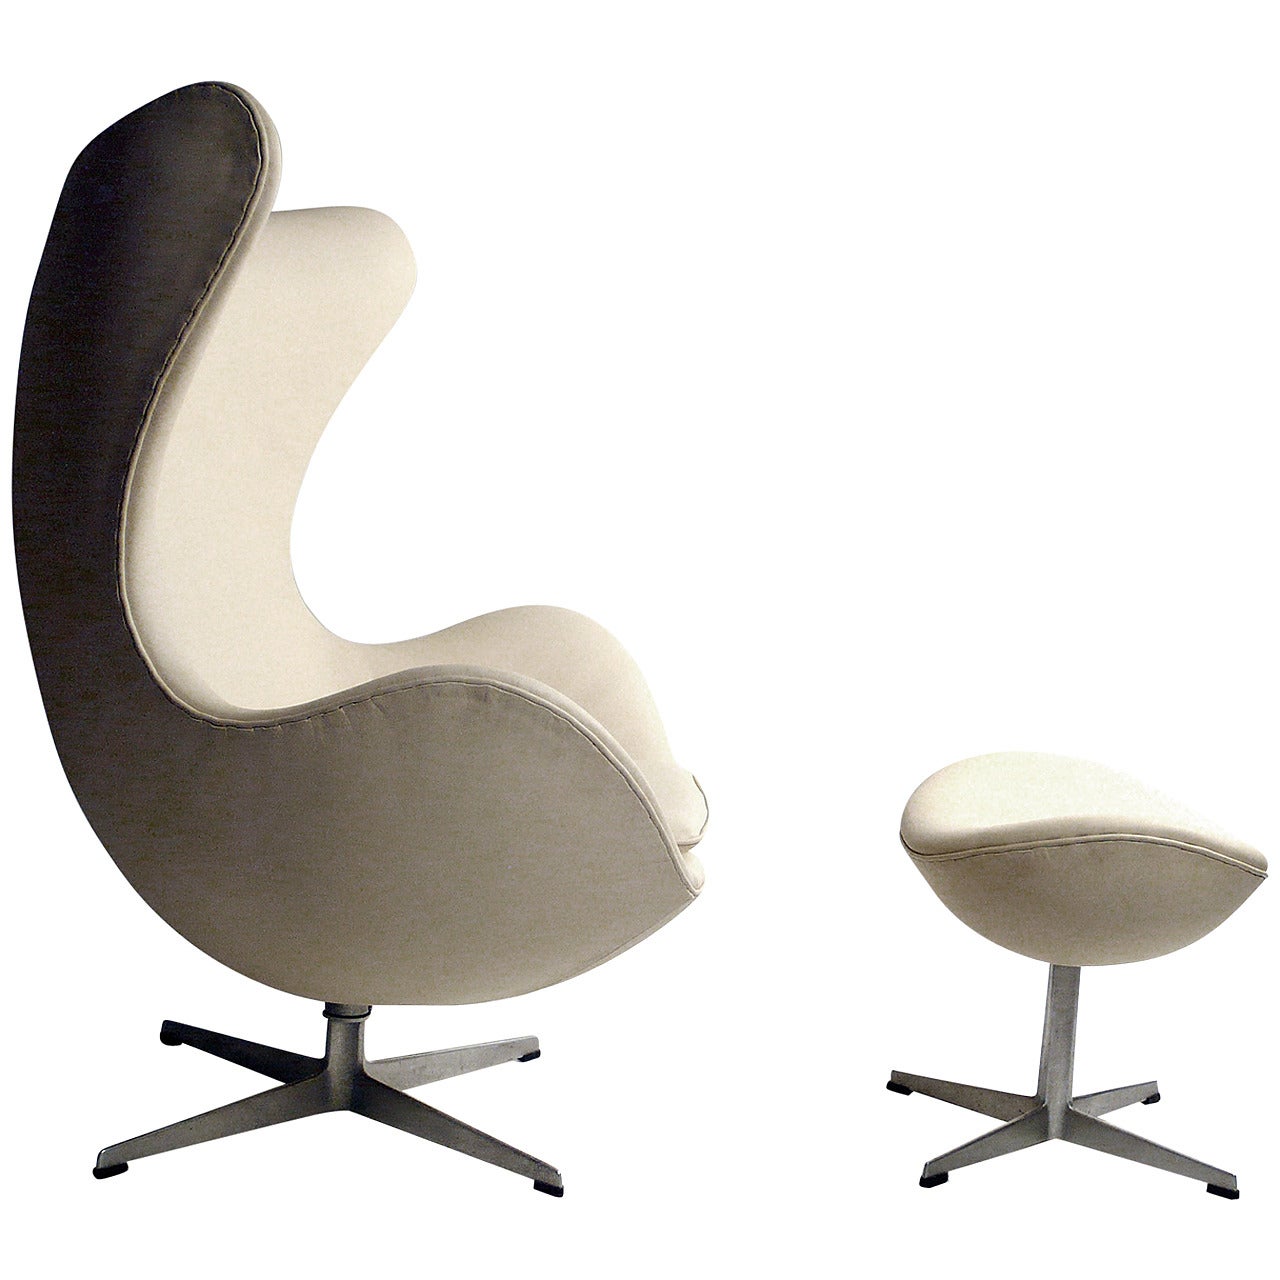 Early Production Leather Egg Chair with Matching Ottoman by Arne Jacobsen